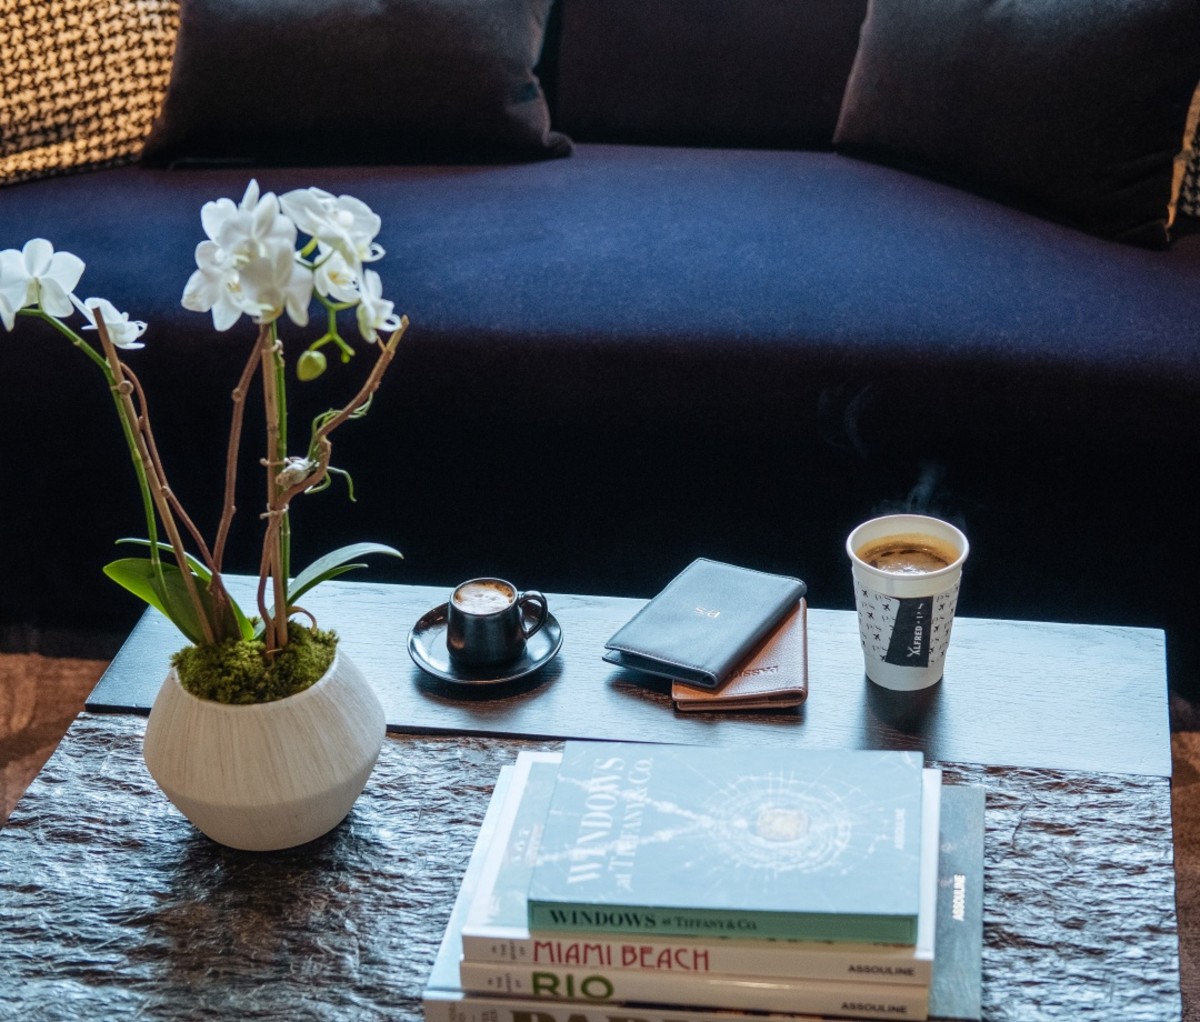 View of PS lounge coffee table with coffee cup and espresso beside books and a vase with flowers